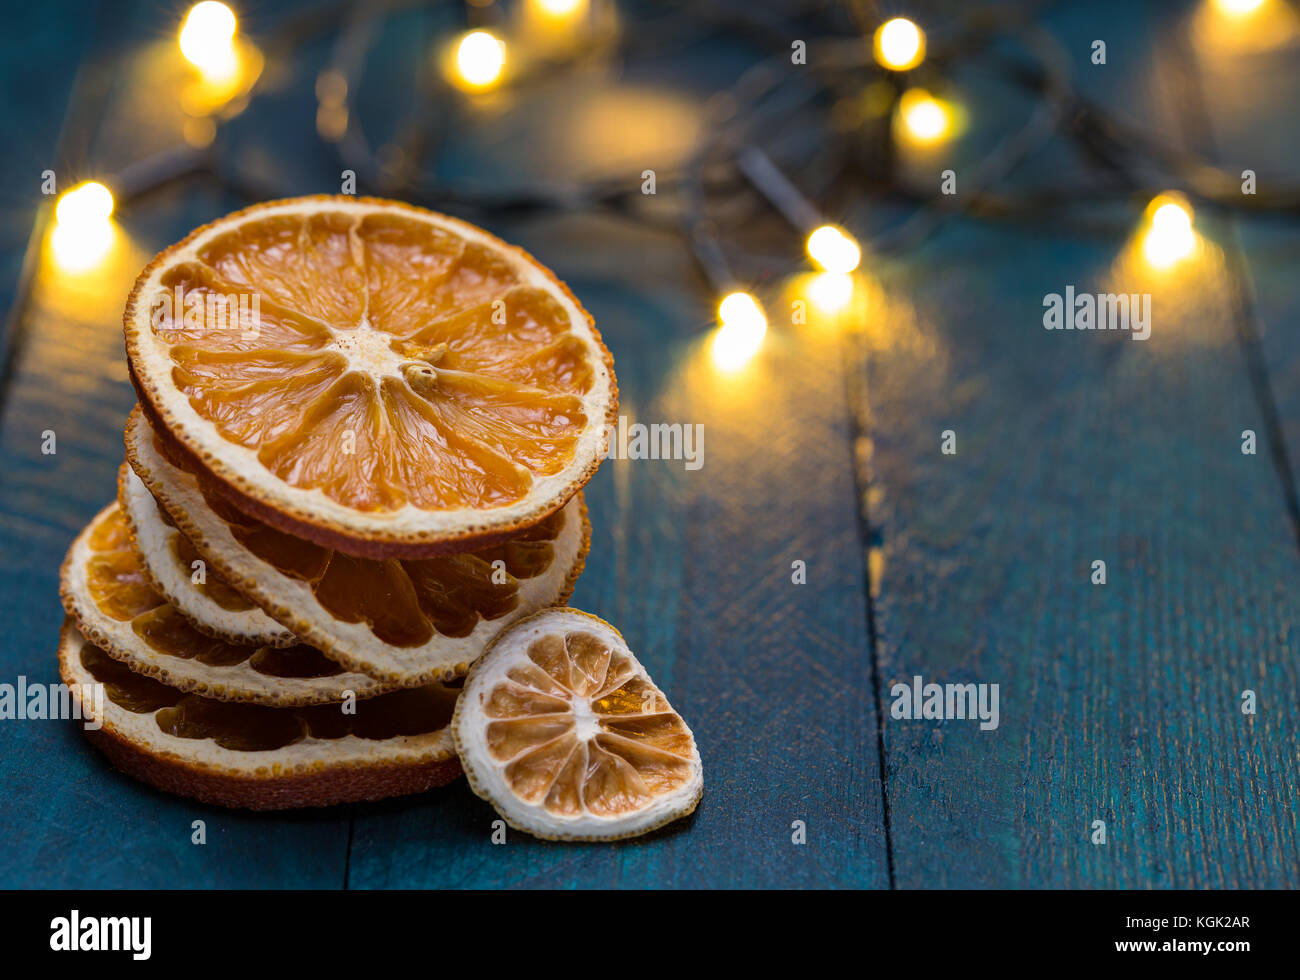 Dried oranges on petrol-colored wood. Stock Photo